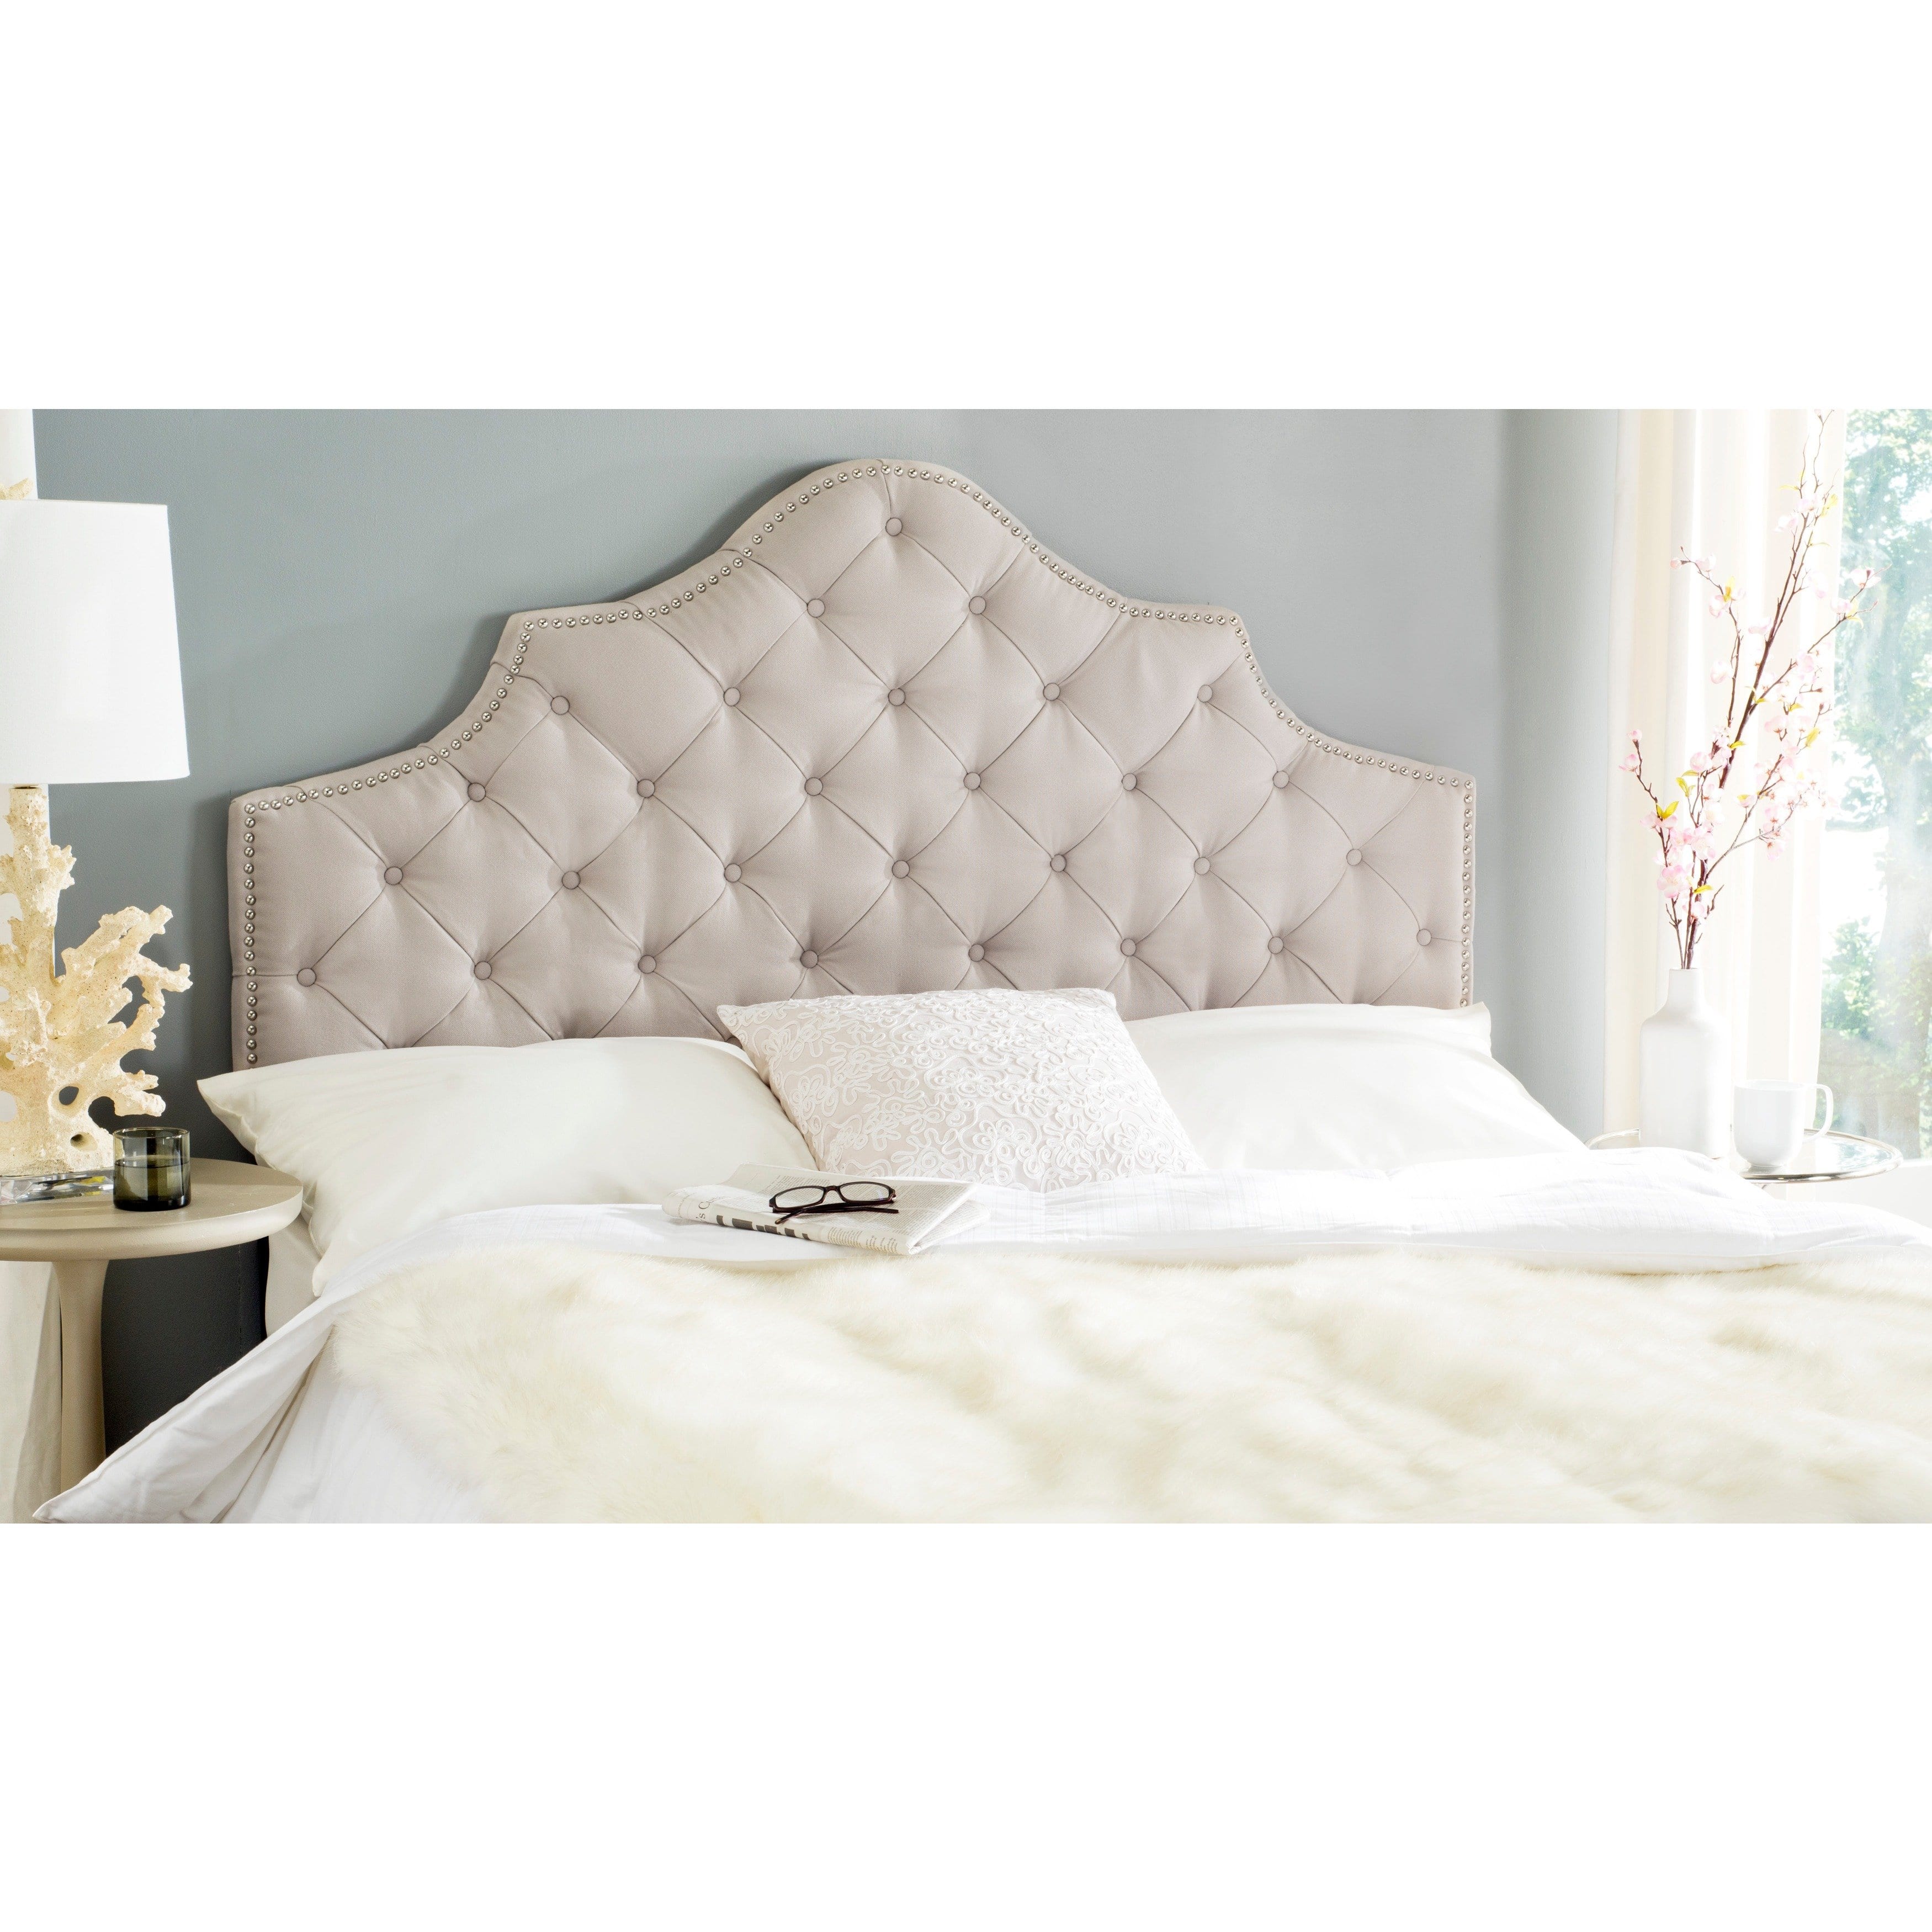 Safavieh Arebelle Taupe Tufted Headboard King 413bd859 a260 47ff aa84 8e88af316a84 - Taupe Linen Upholstered Tufted Headboard